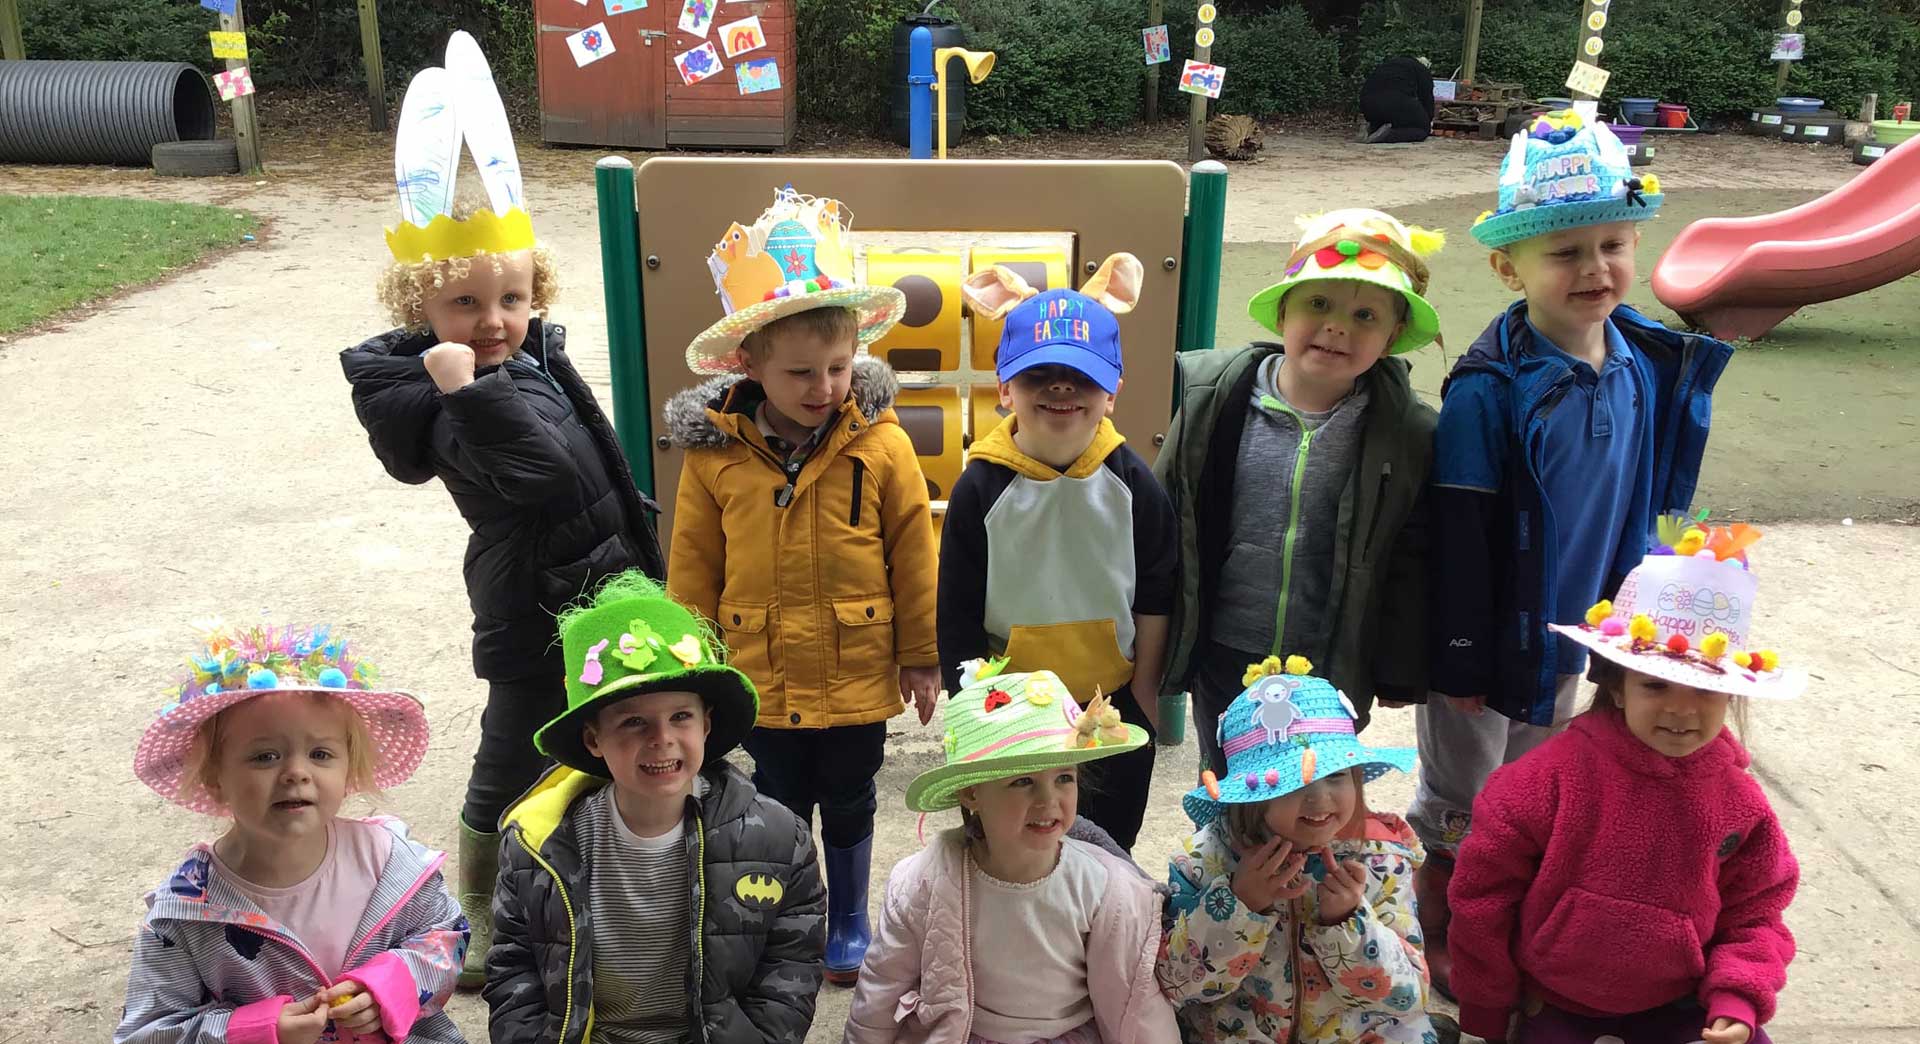 A group of children posing with their Easter bonnets on